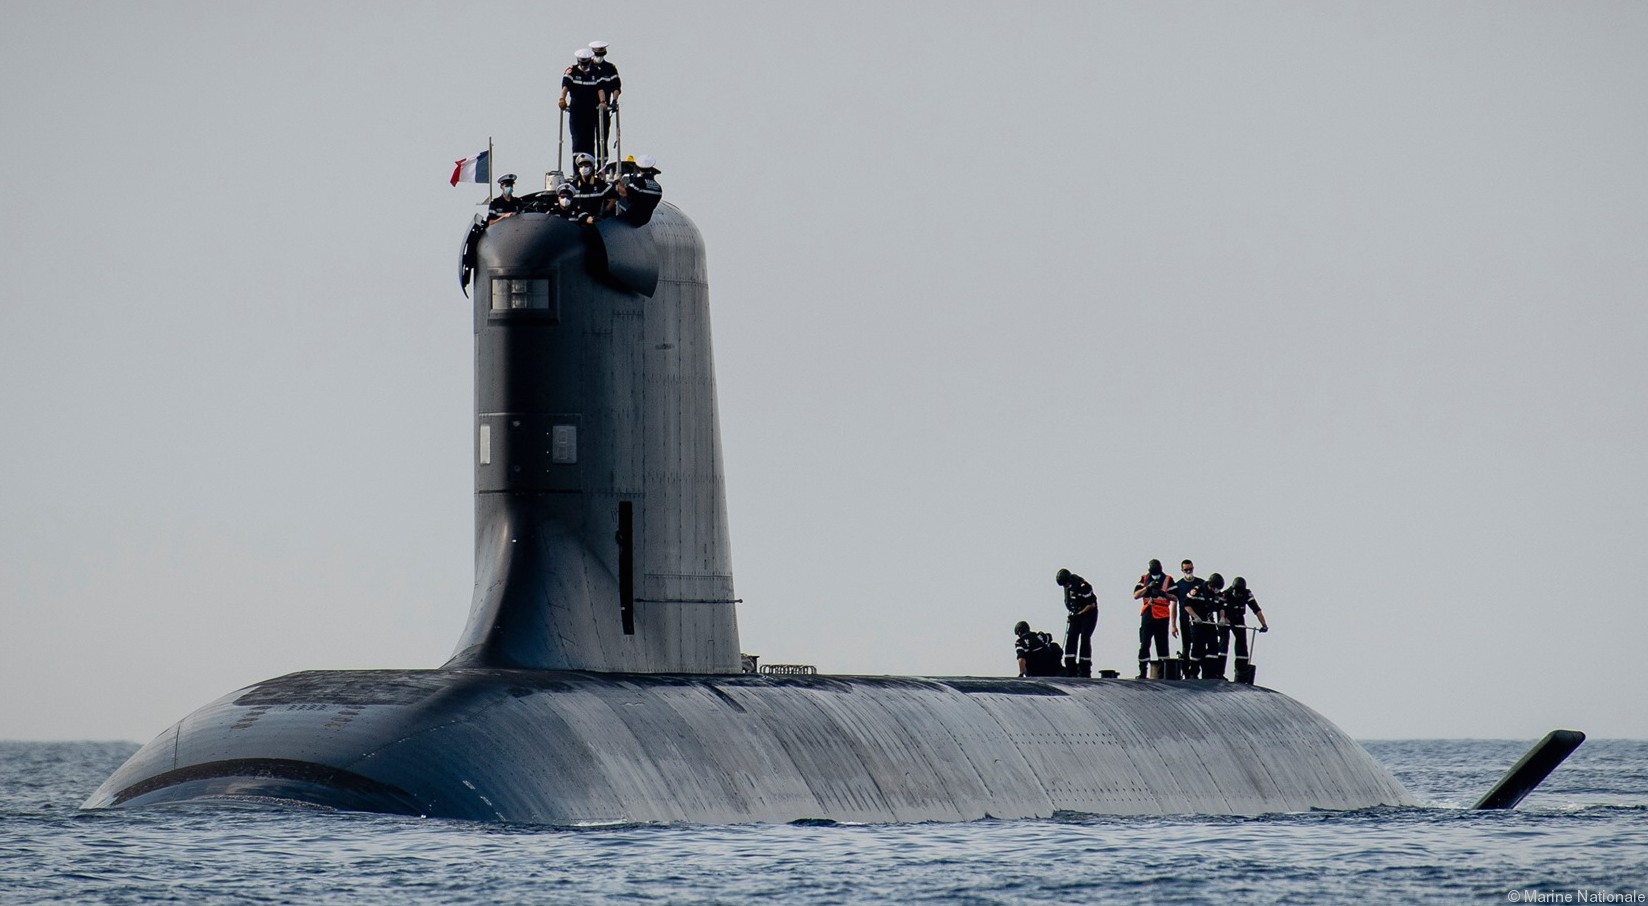 s-635 suffren barracuda class attack submarine french navy marine nationale sous-marin nucleaire d'attaque sna 09